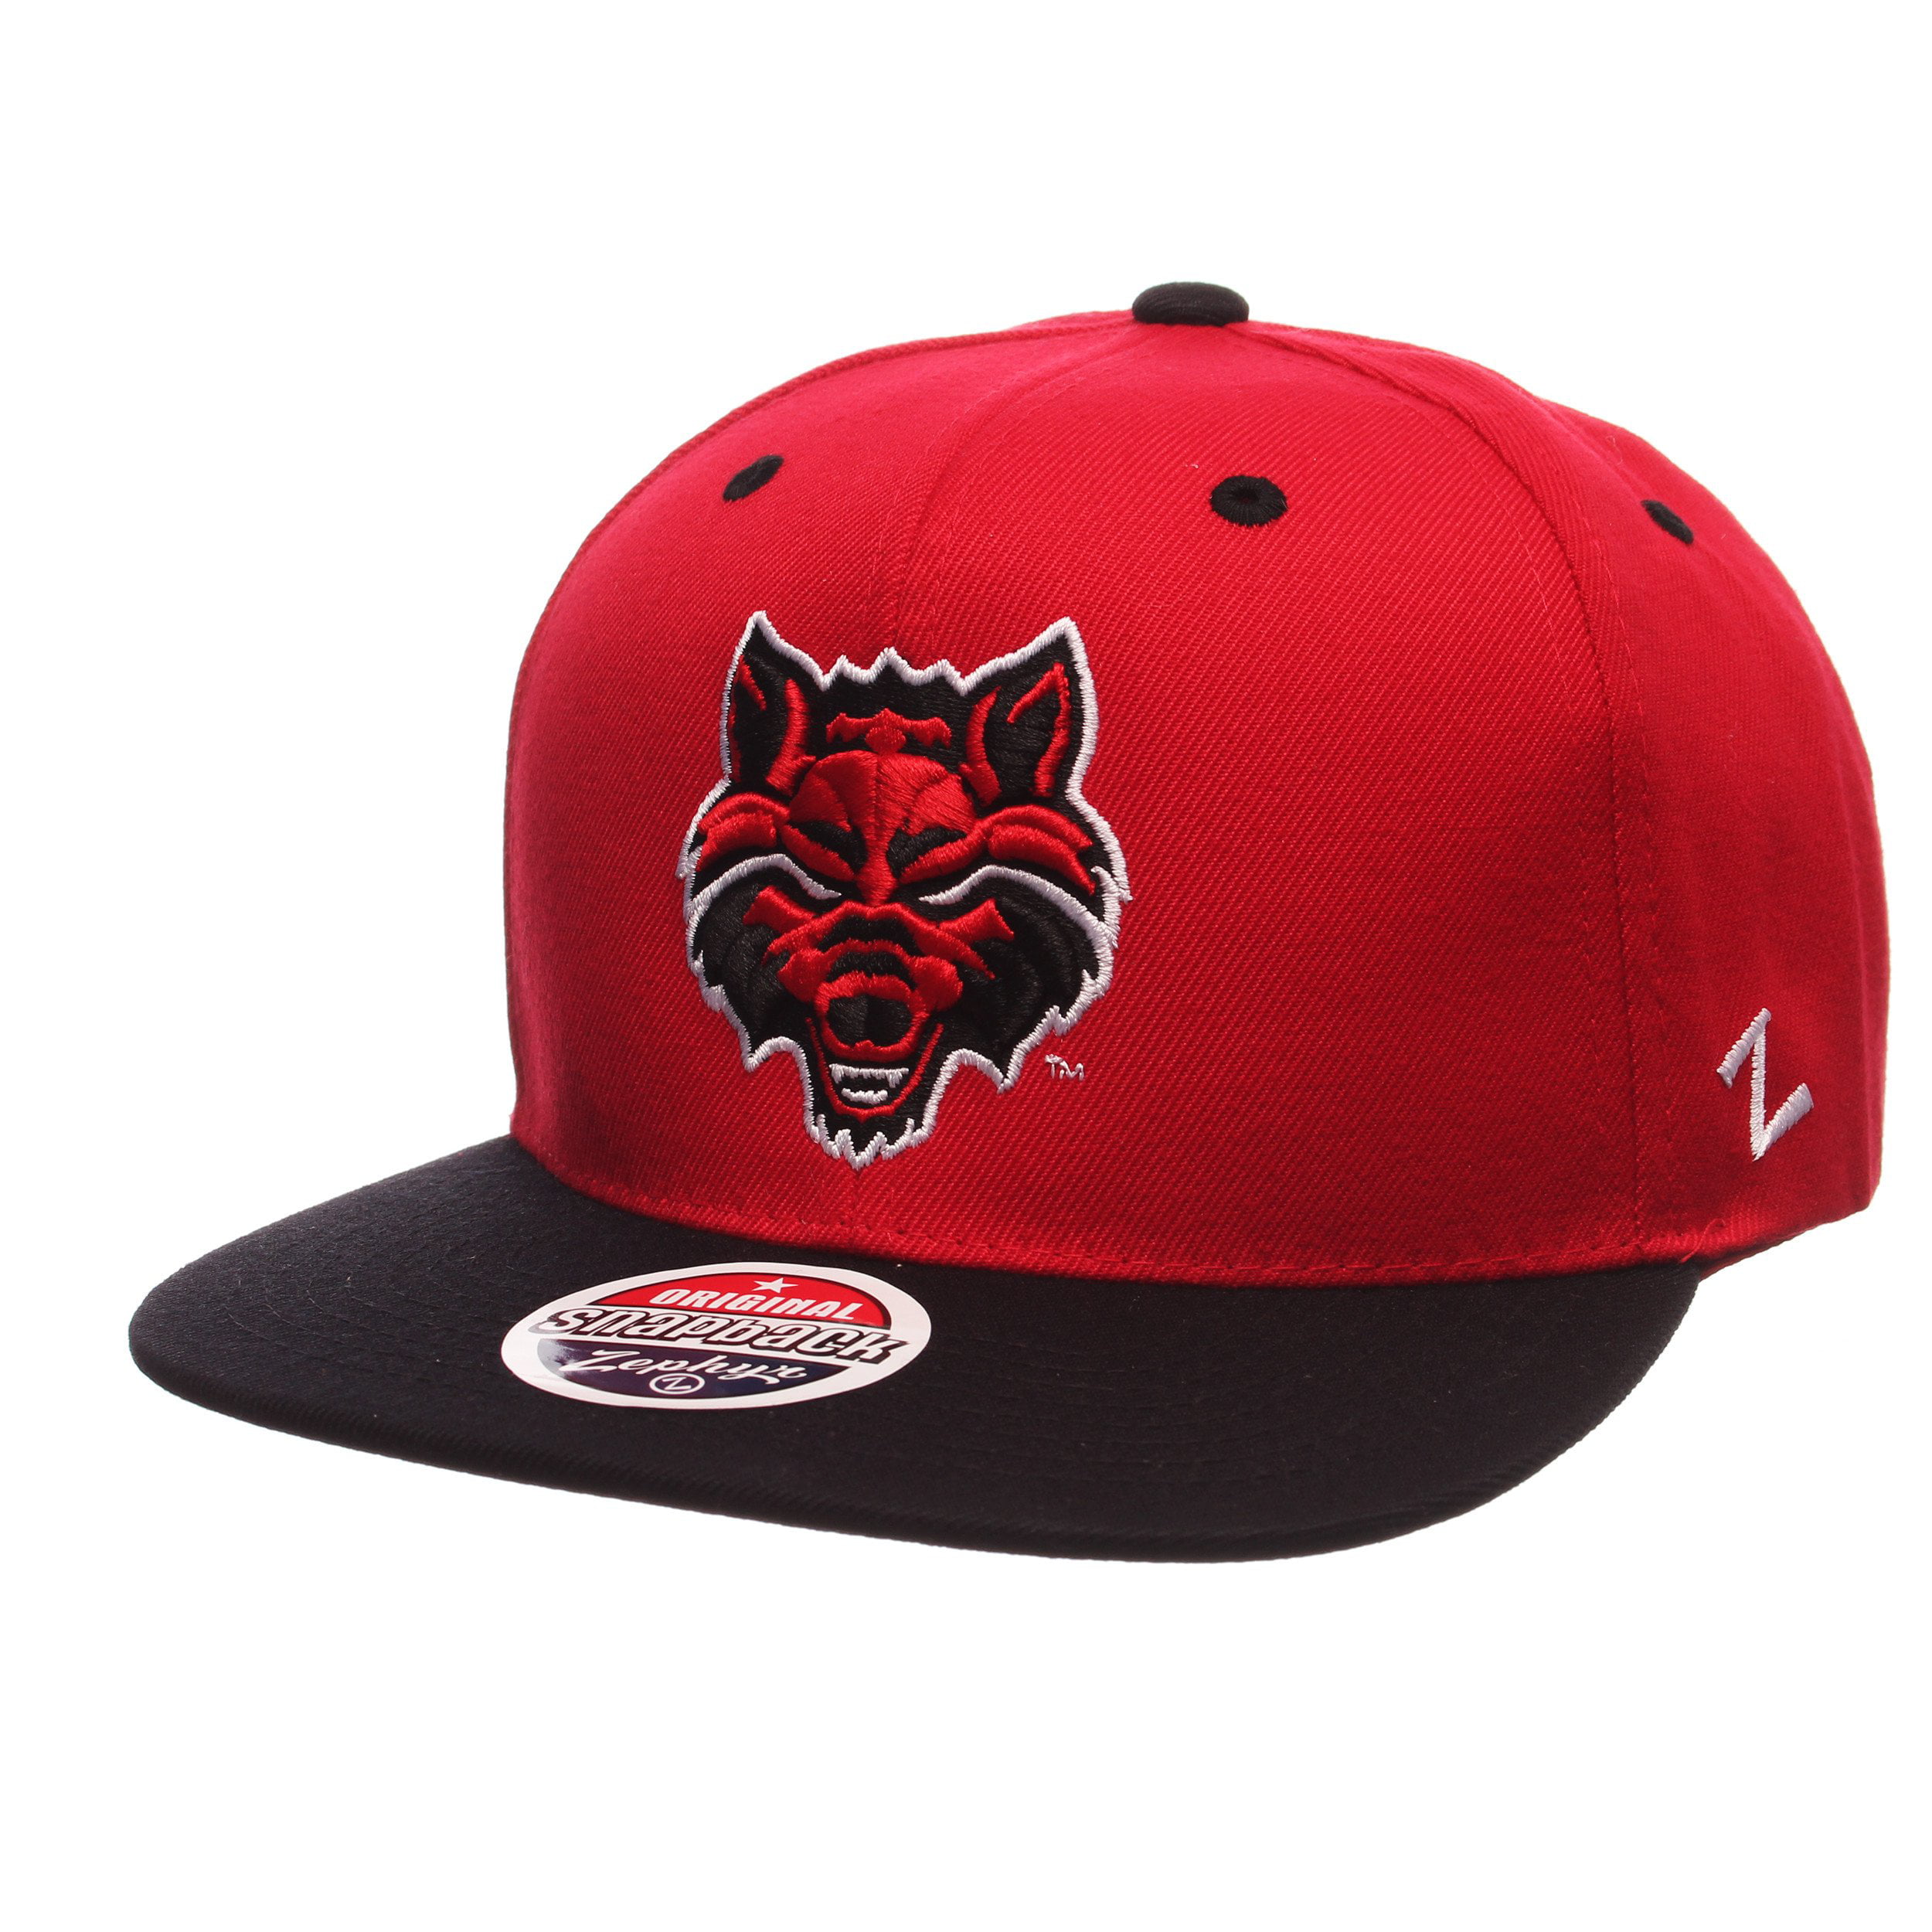 Arkansas State Red Wolves Official NCAA Z11 Adjustable Hat Cap by ...